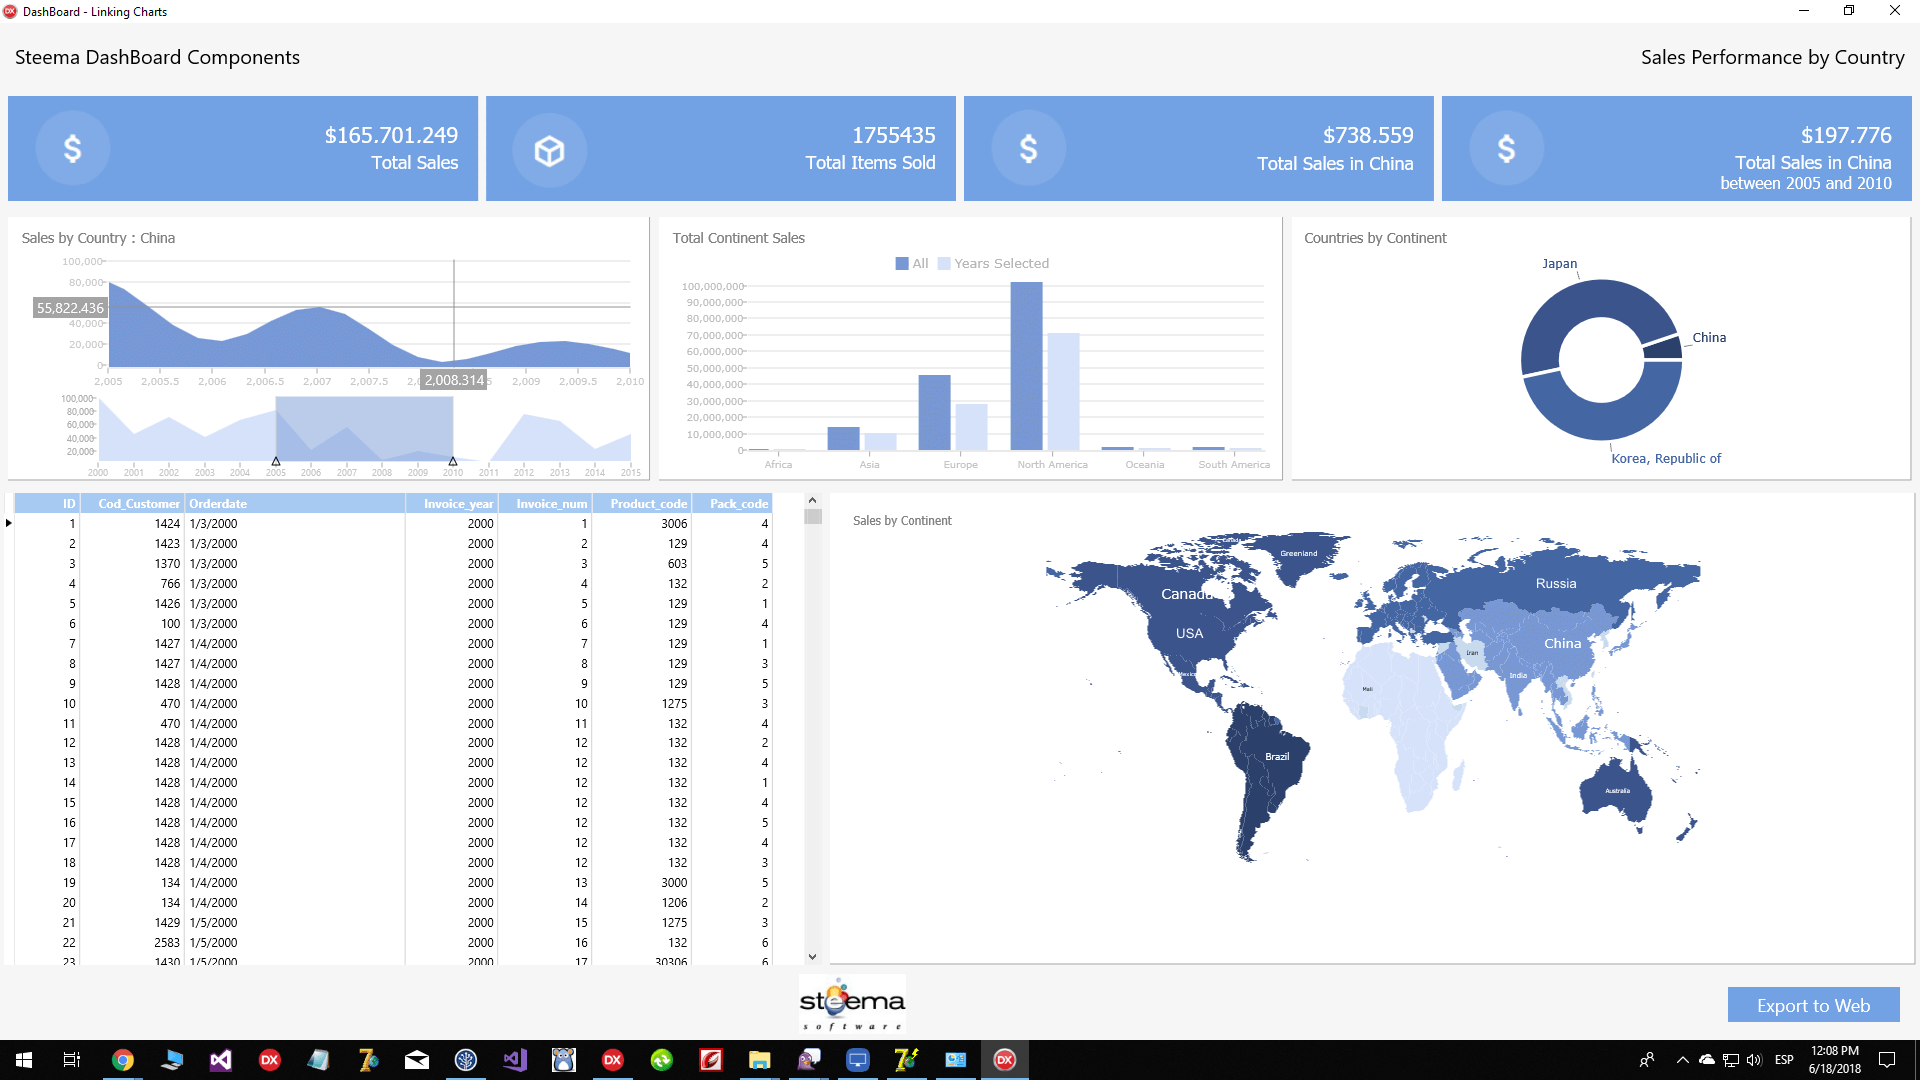 The example uses several TeeChart features in order to interact between the different Chart and Grid, as well as some TeeChart Tools. The dashboard represents the sales activities of a company with products in several markets around the globe. 